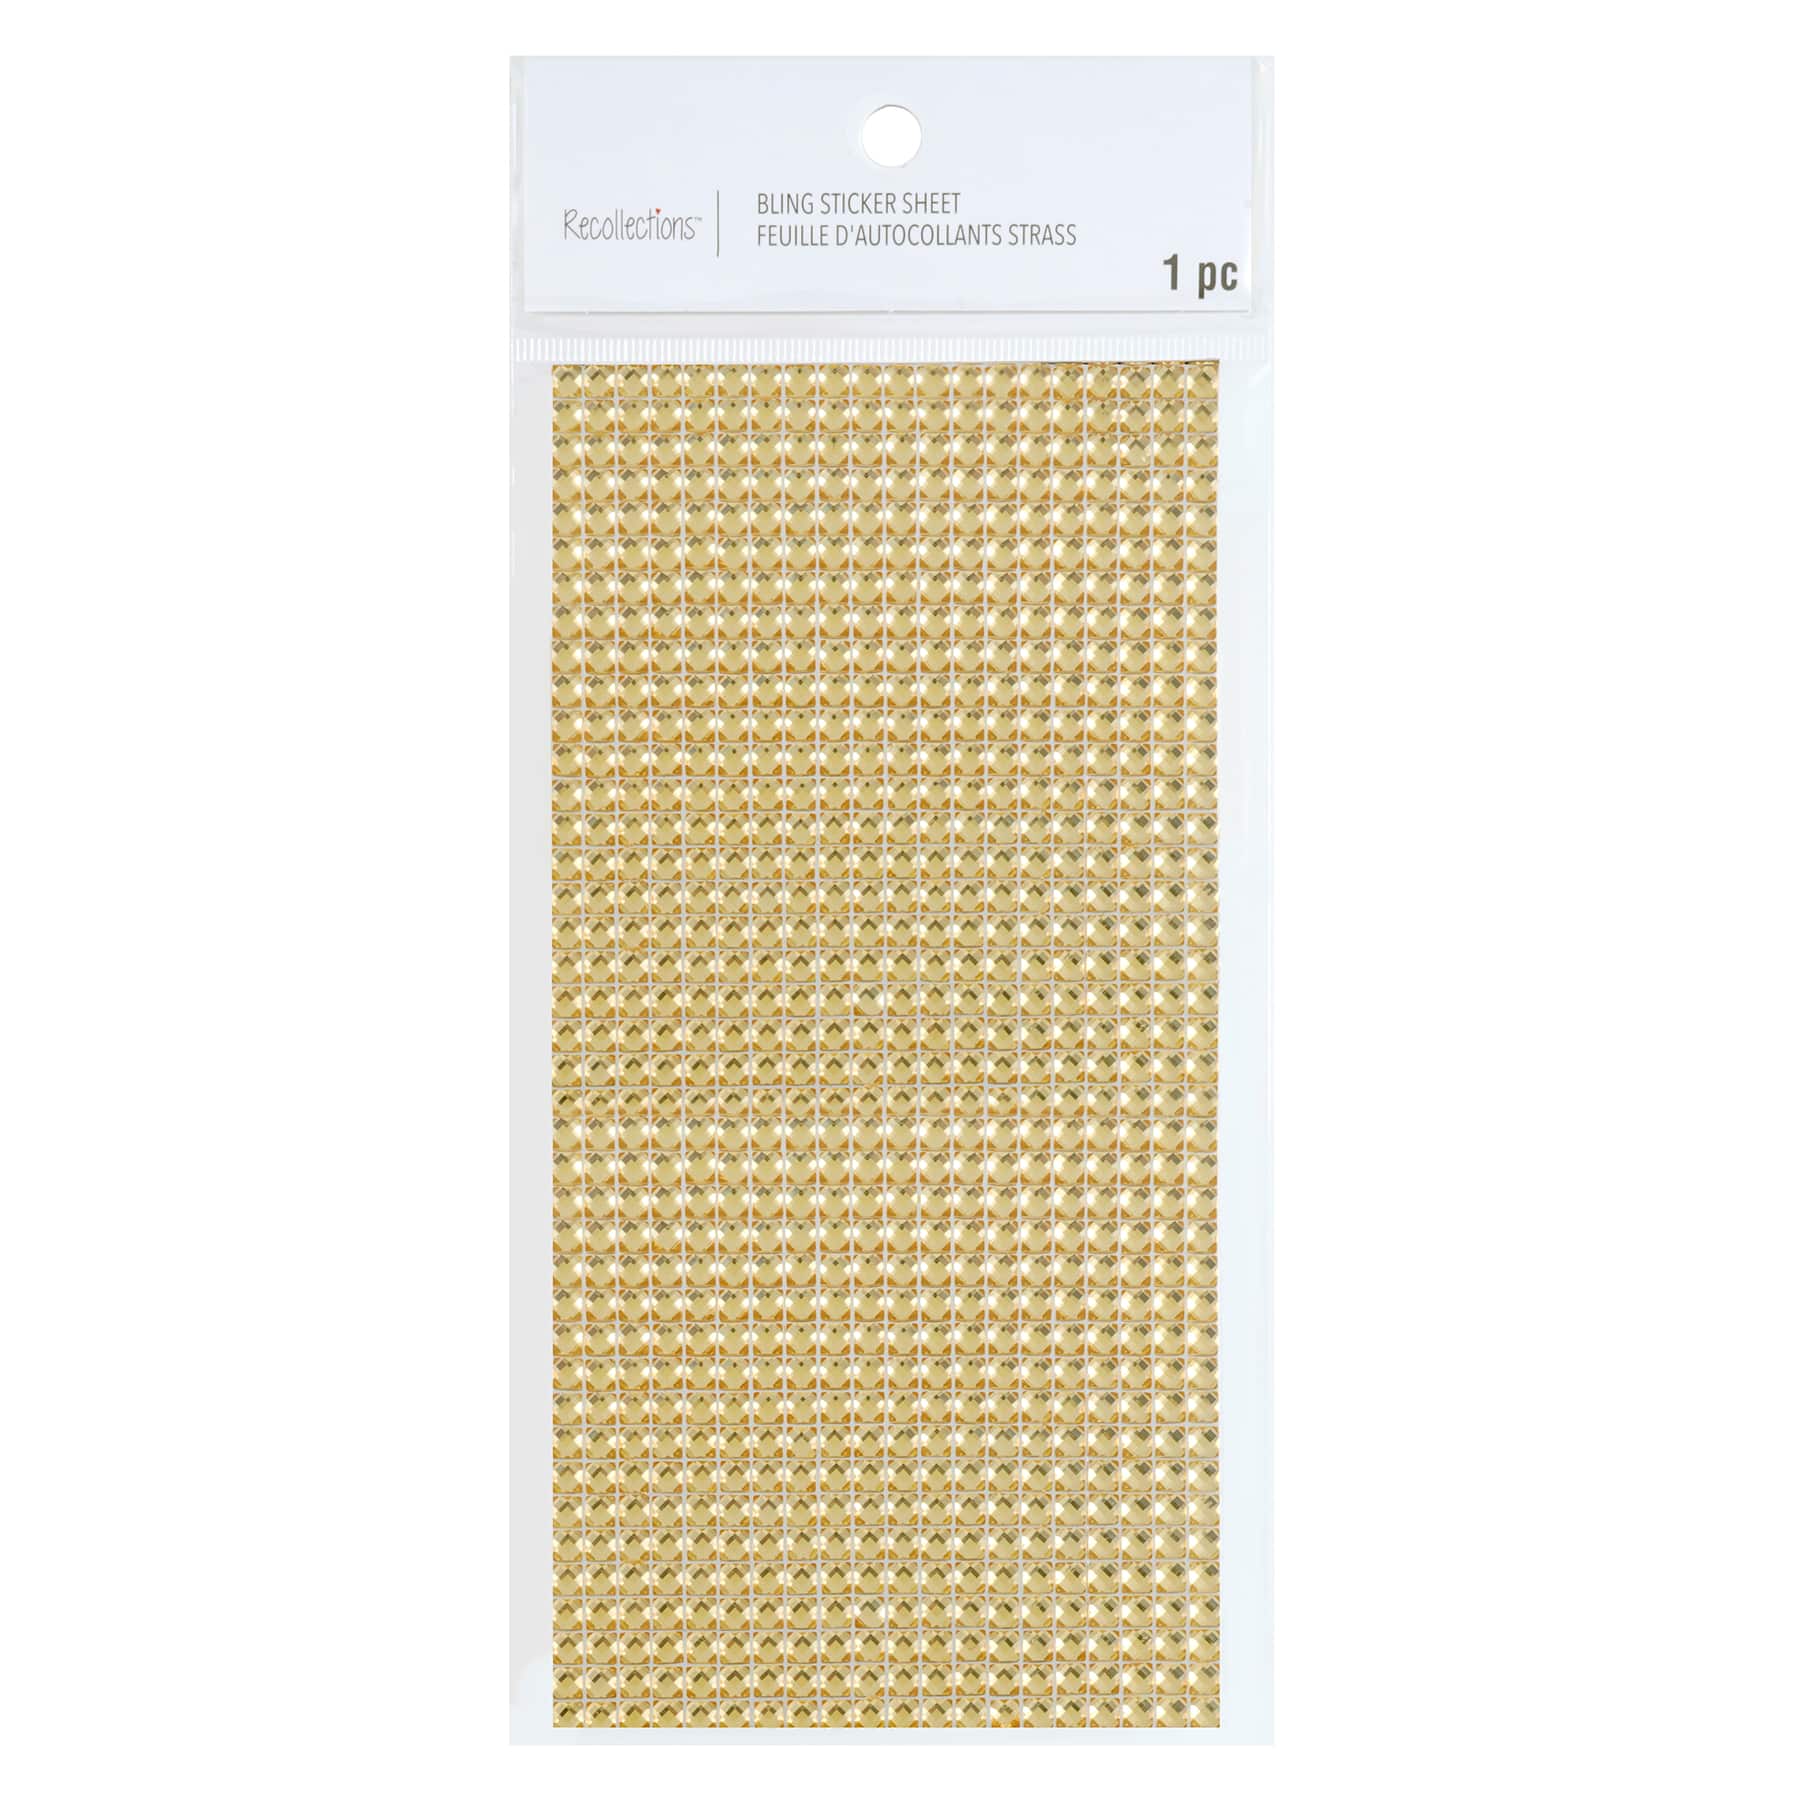 12 Pack: Rhinestones Sheet by Recollections™